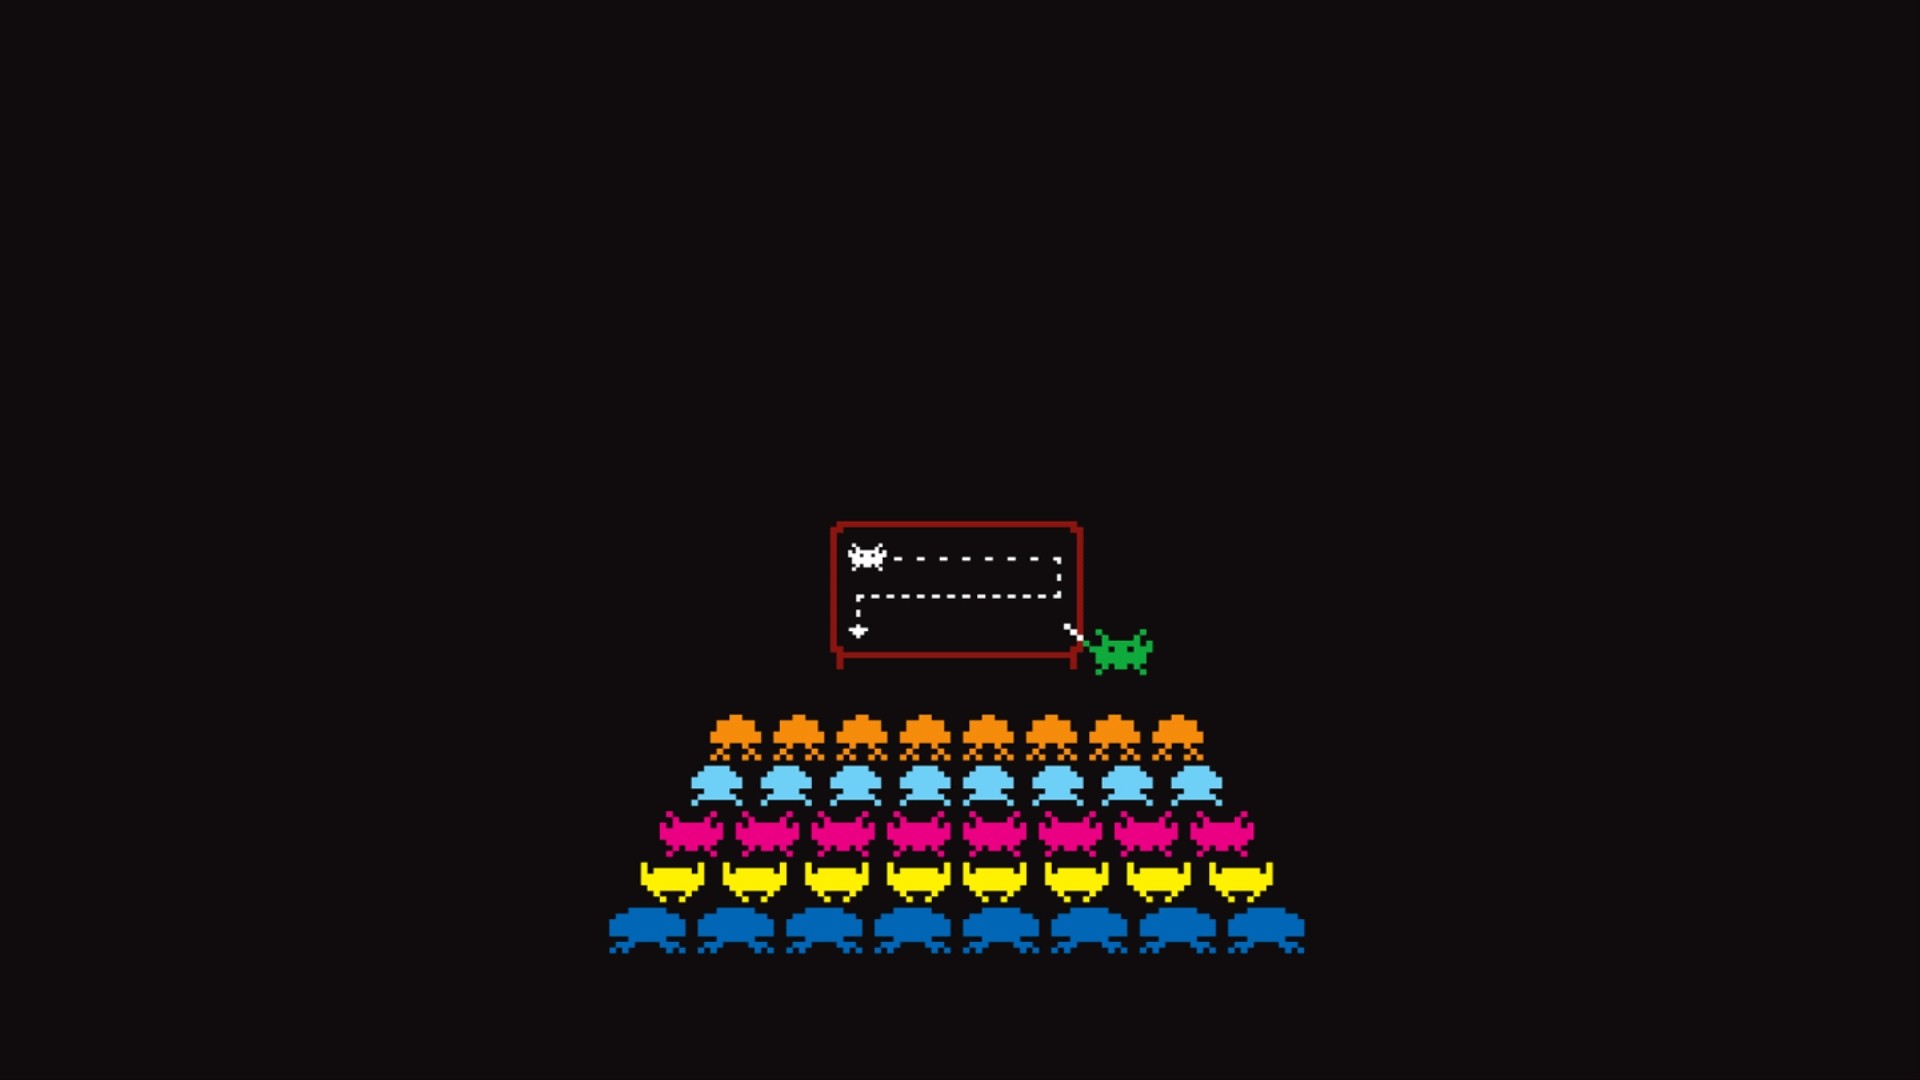 Space Invaders Humor Video Game Art Retro Games Video Games Simple Background 1920x1080